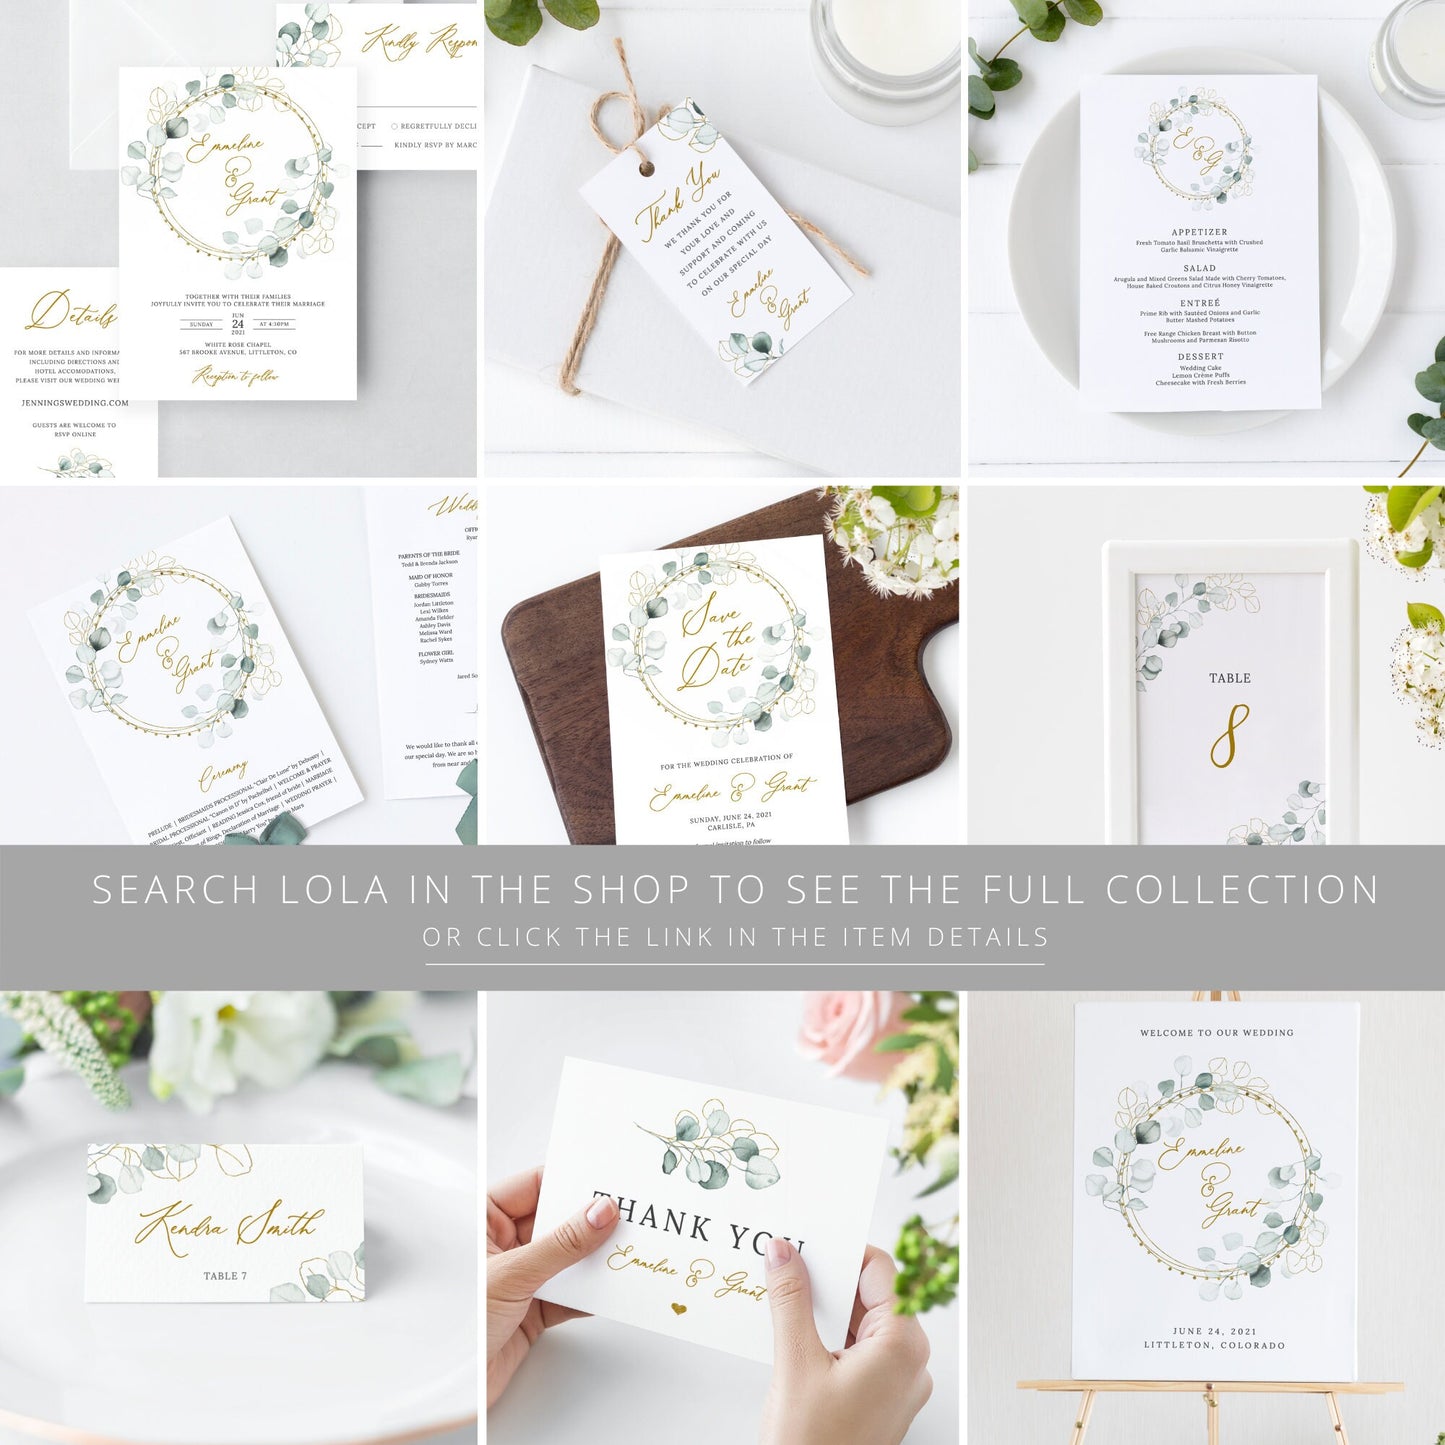 Editable  Greenery and Gold Save the Date Save the Date Cards Eucalyptus Wedding Announcement Digital Template